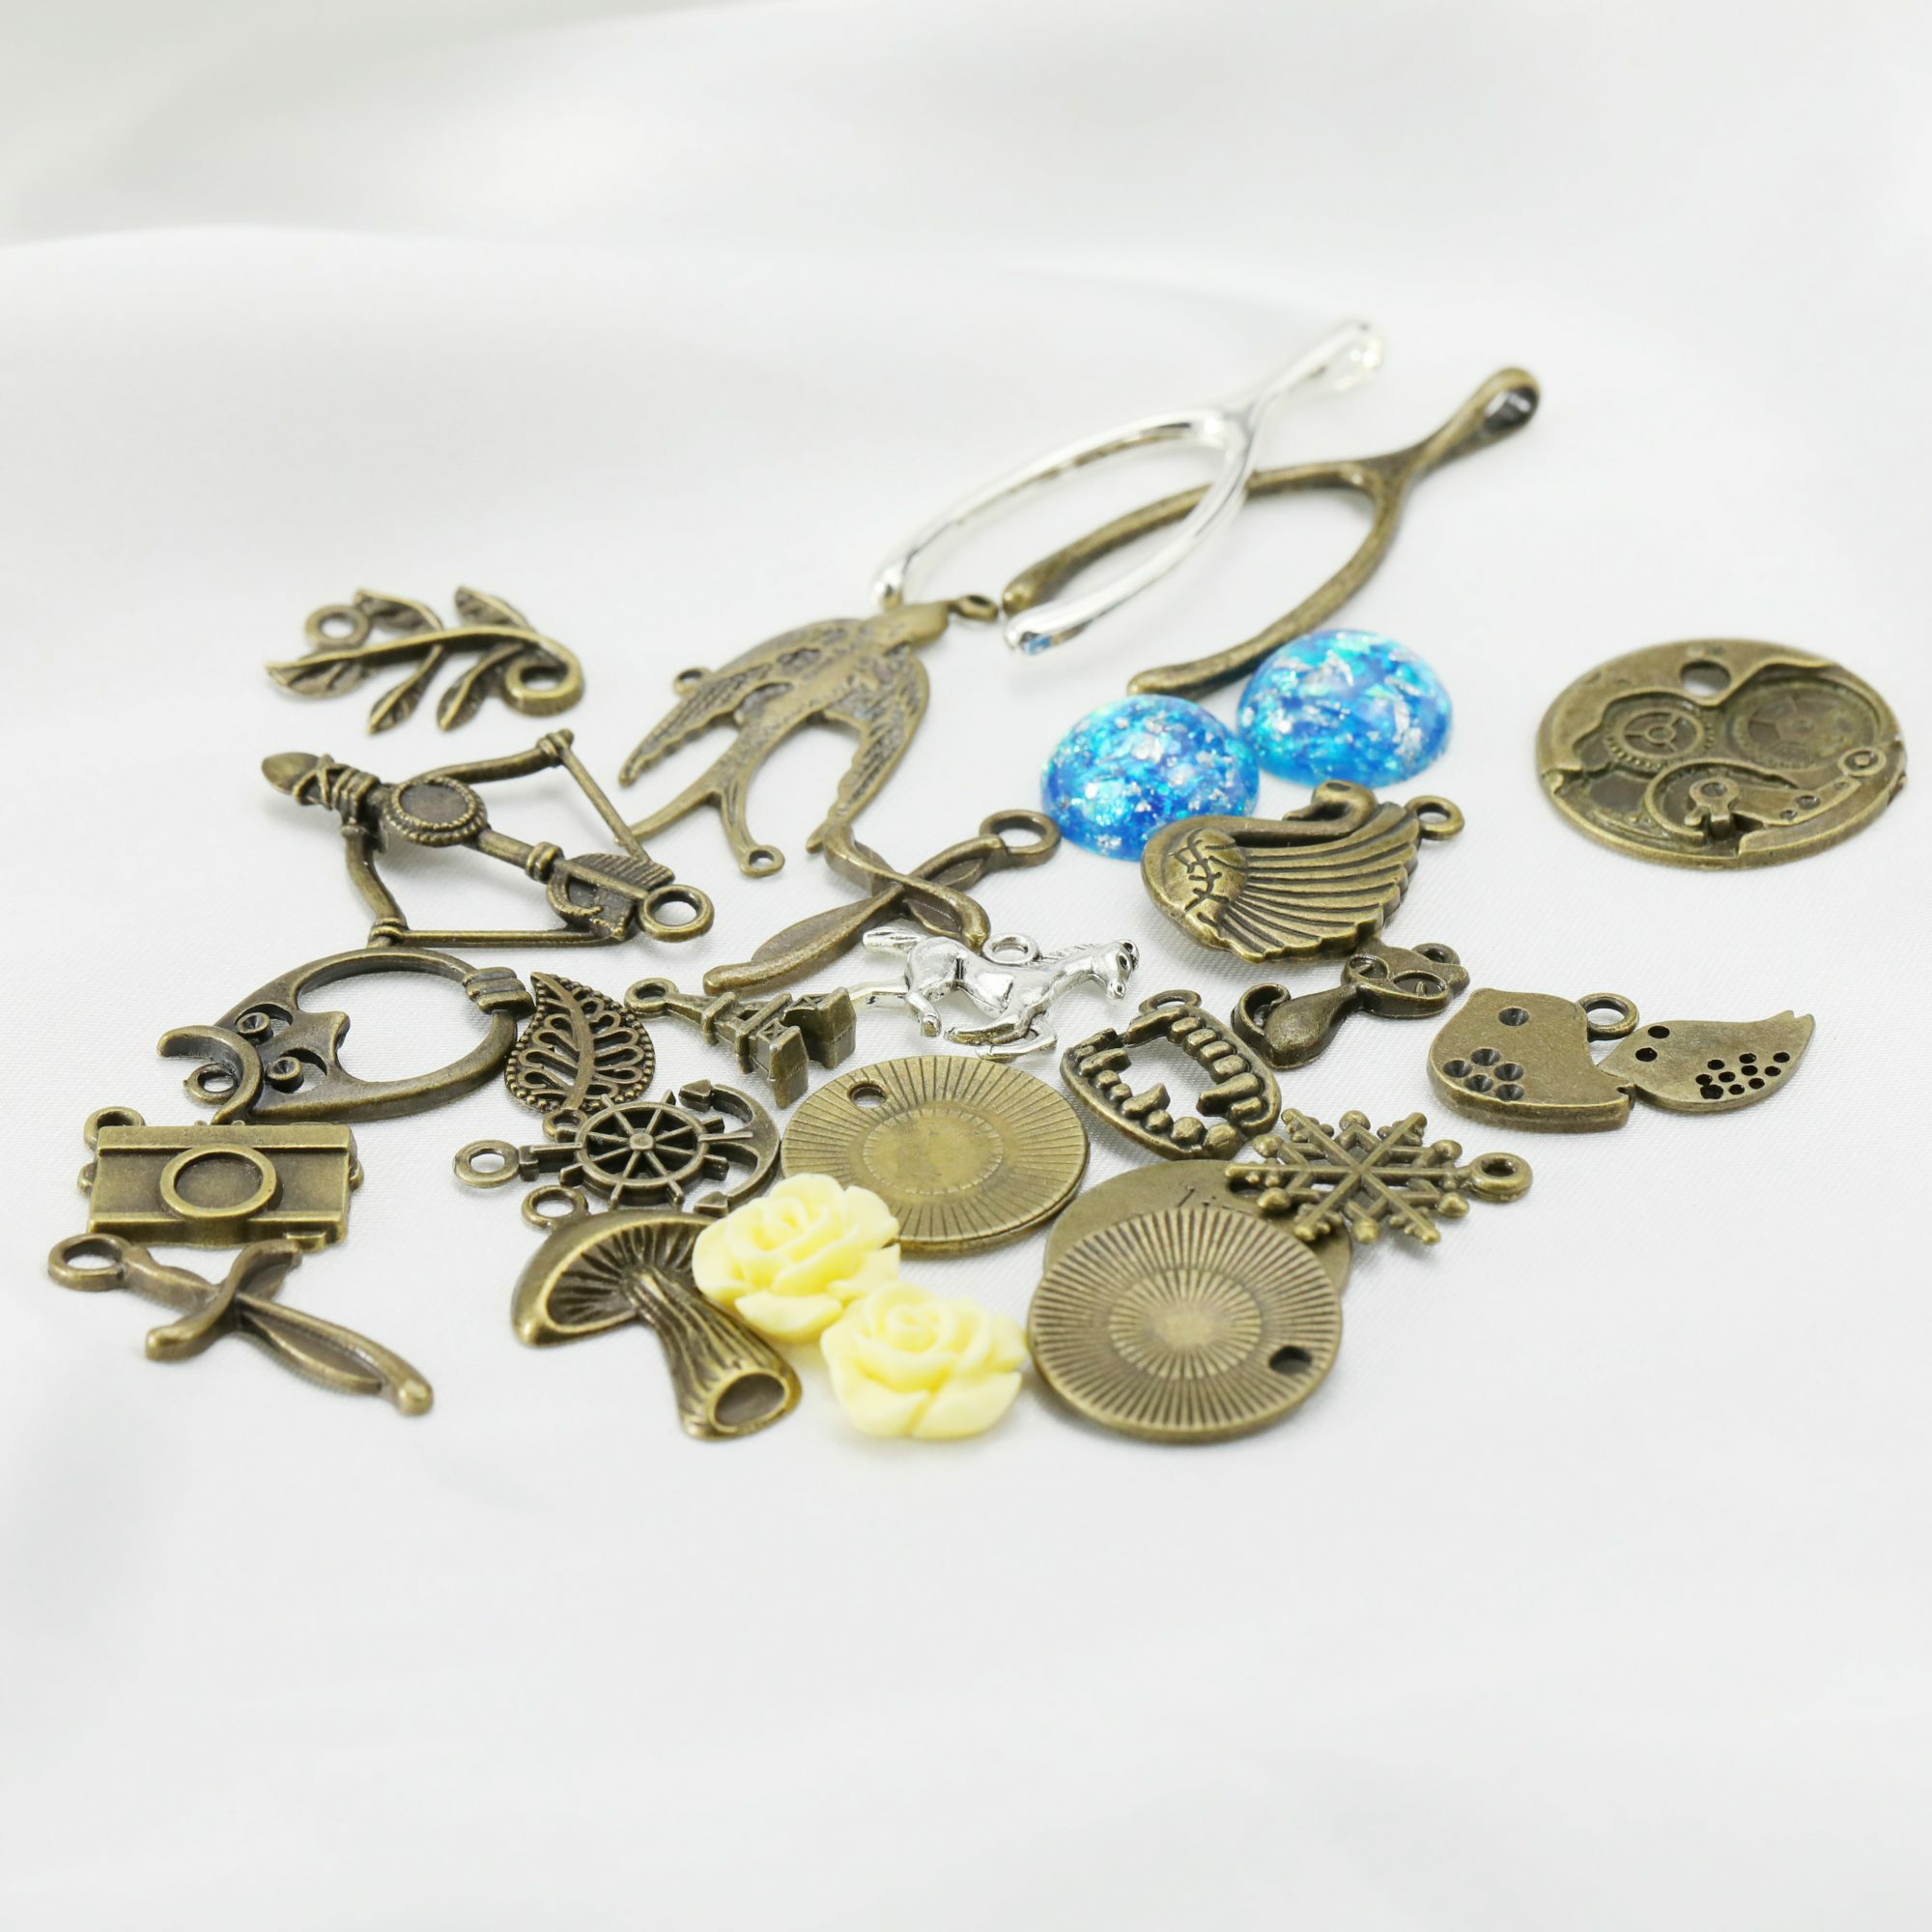 50Pcs Assortment Antiqued Bronze Alloy Pendant Charm DIY Jewlery Supplies Findings 1800521 - Click Image to Close